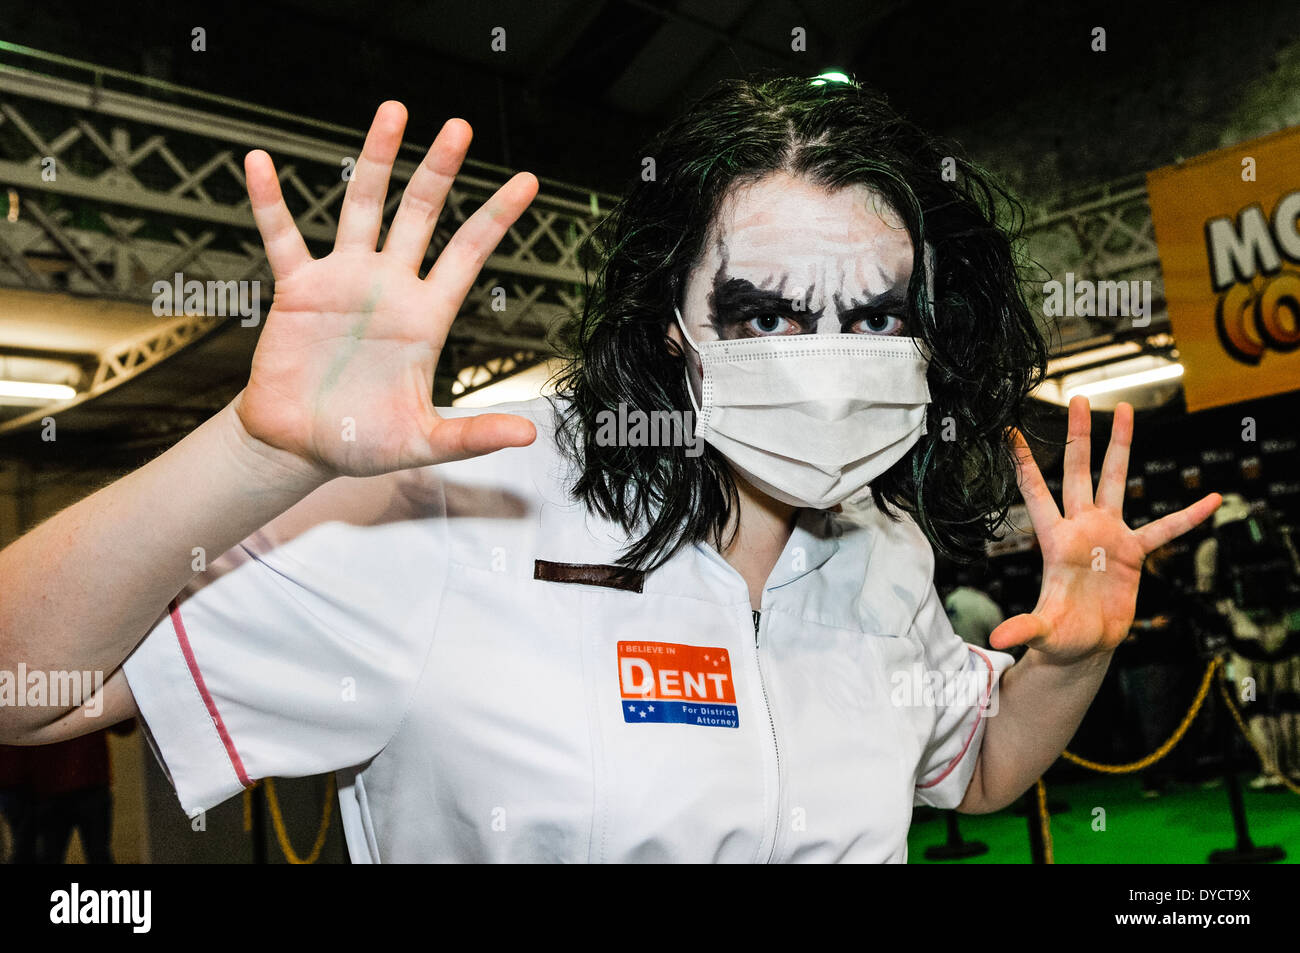 A teenage boy dressed as the Joker dressed as a nurse from the film Batman: The Dark Knight, at a sci-fi convention Stock Photo